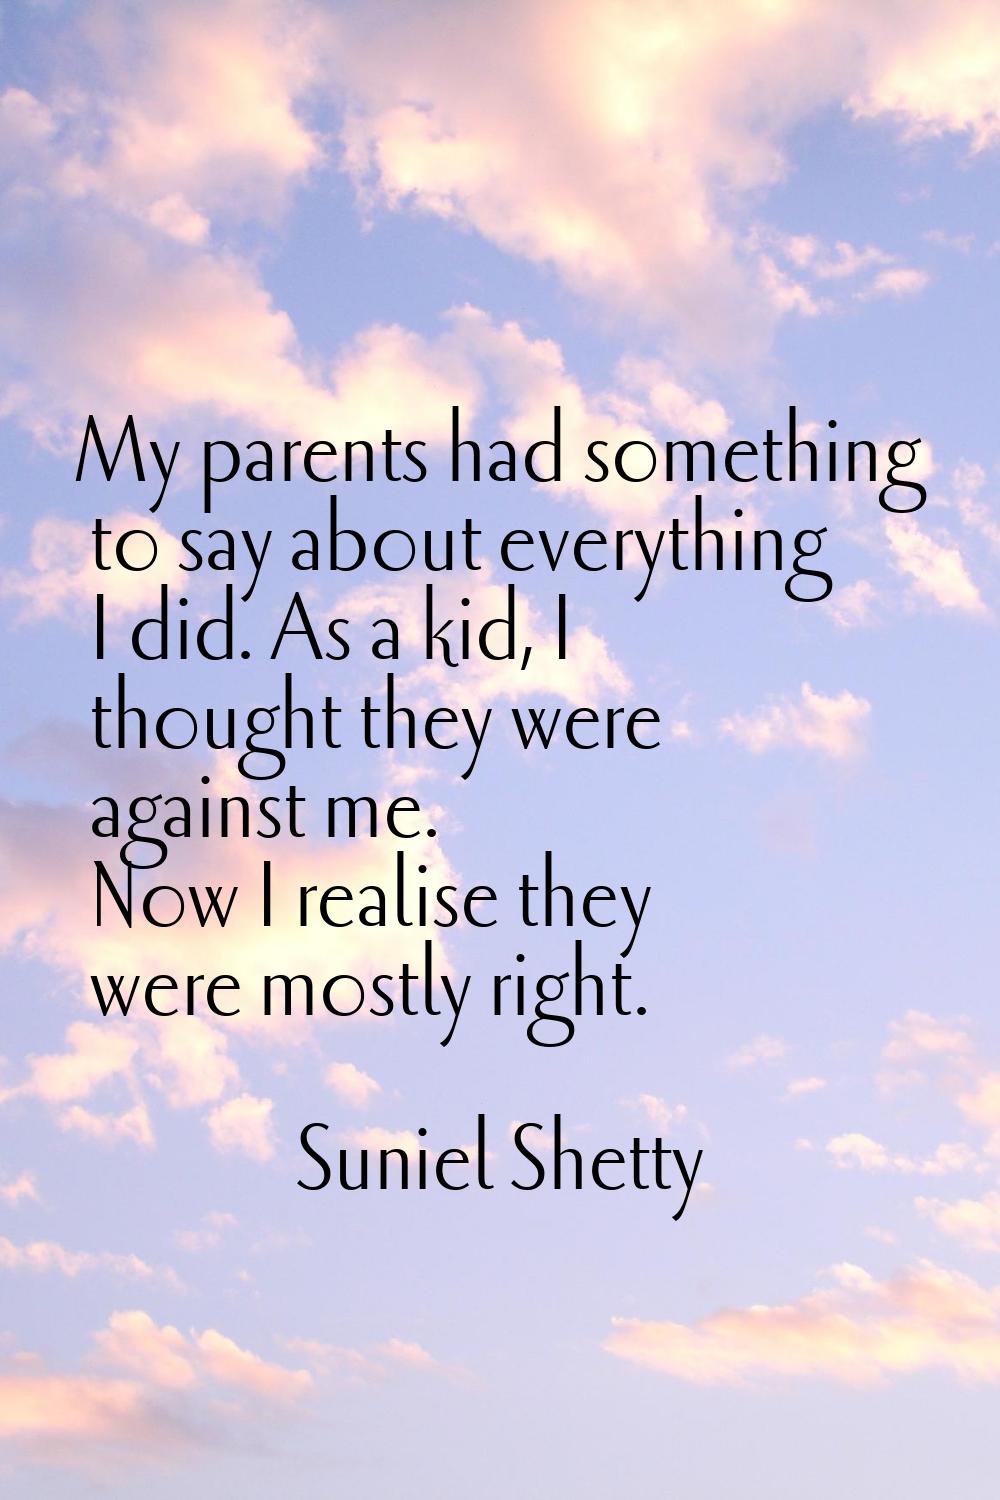 My parents had something to say about everything I did. As a kid, I thought they were against me. N